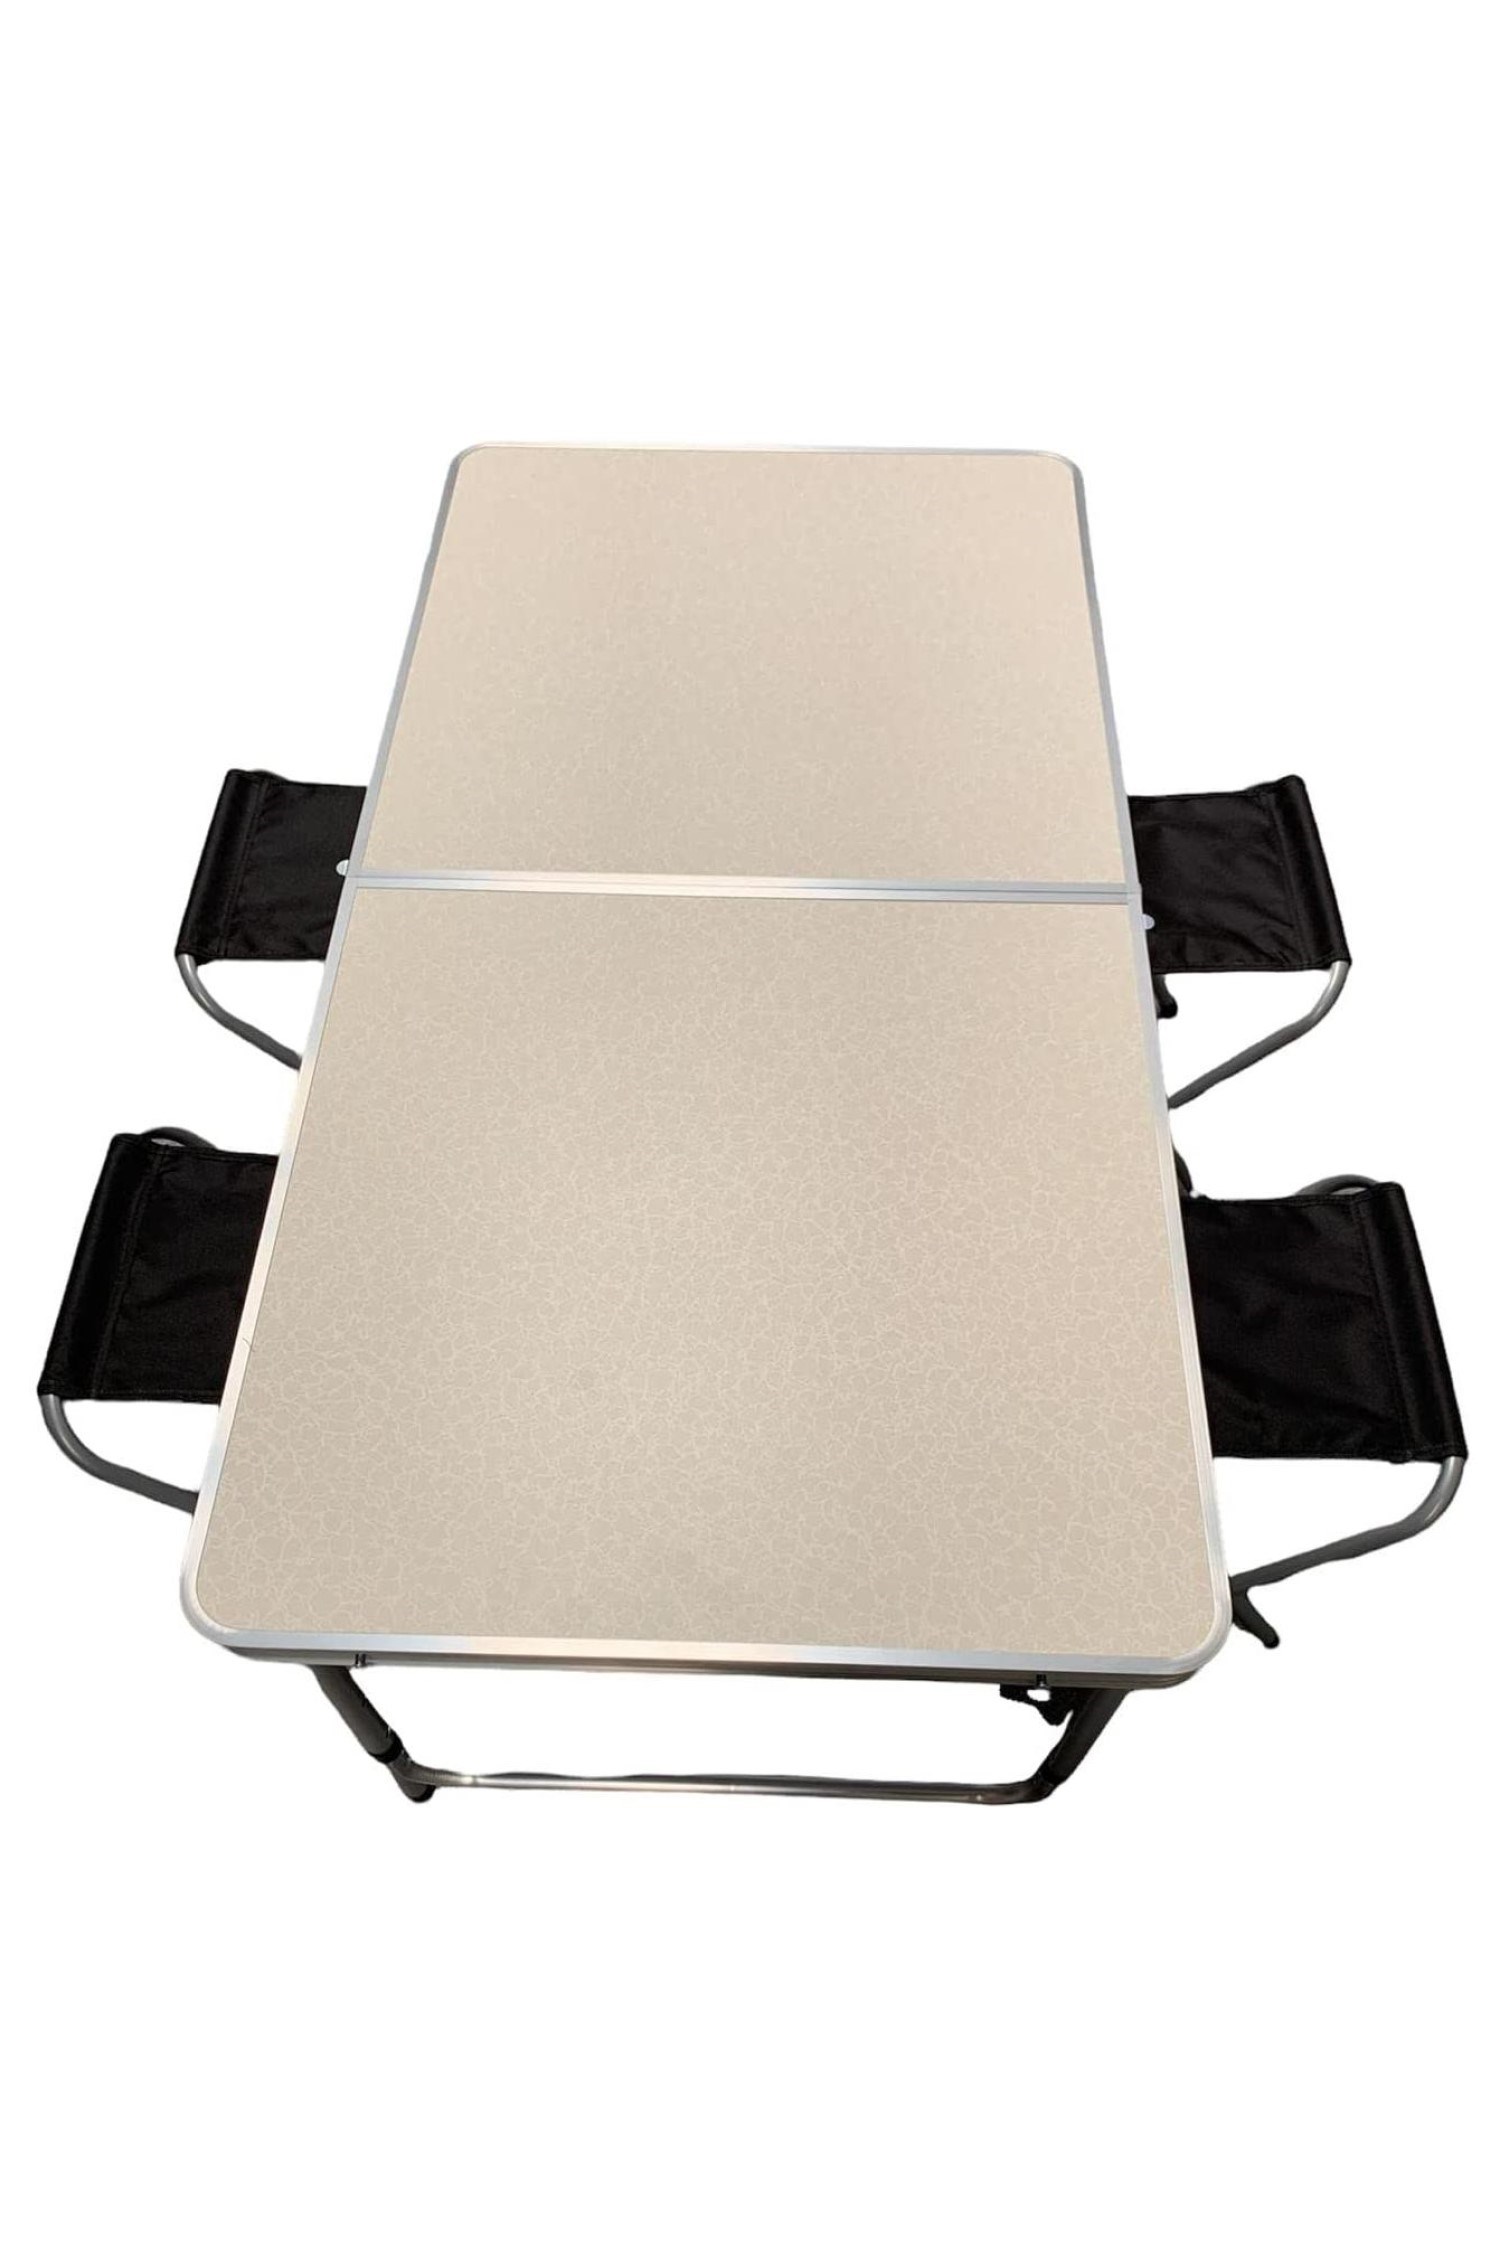 Foldable Picnic Table and 4 Stools Set -